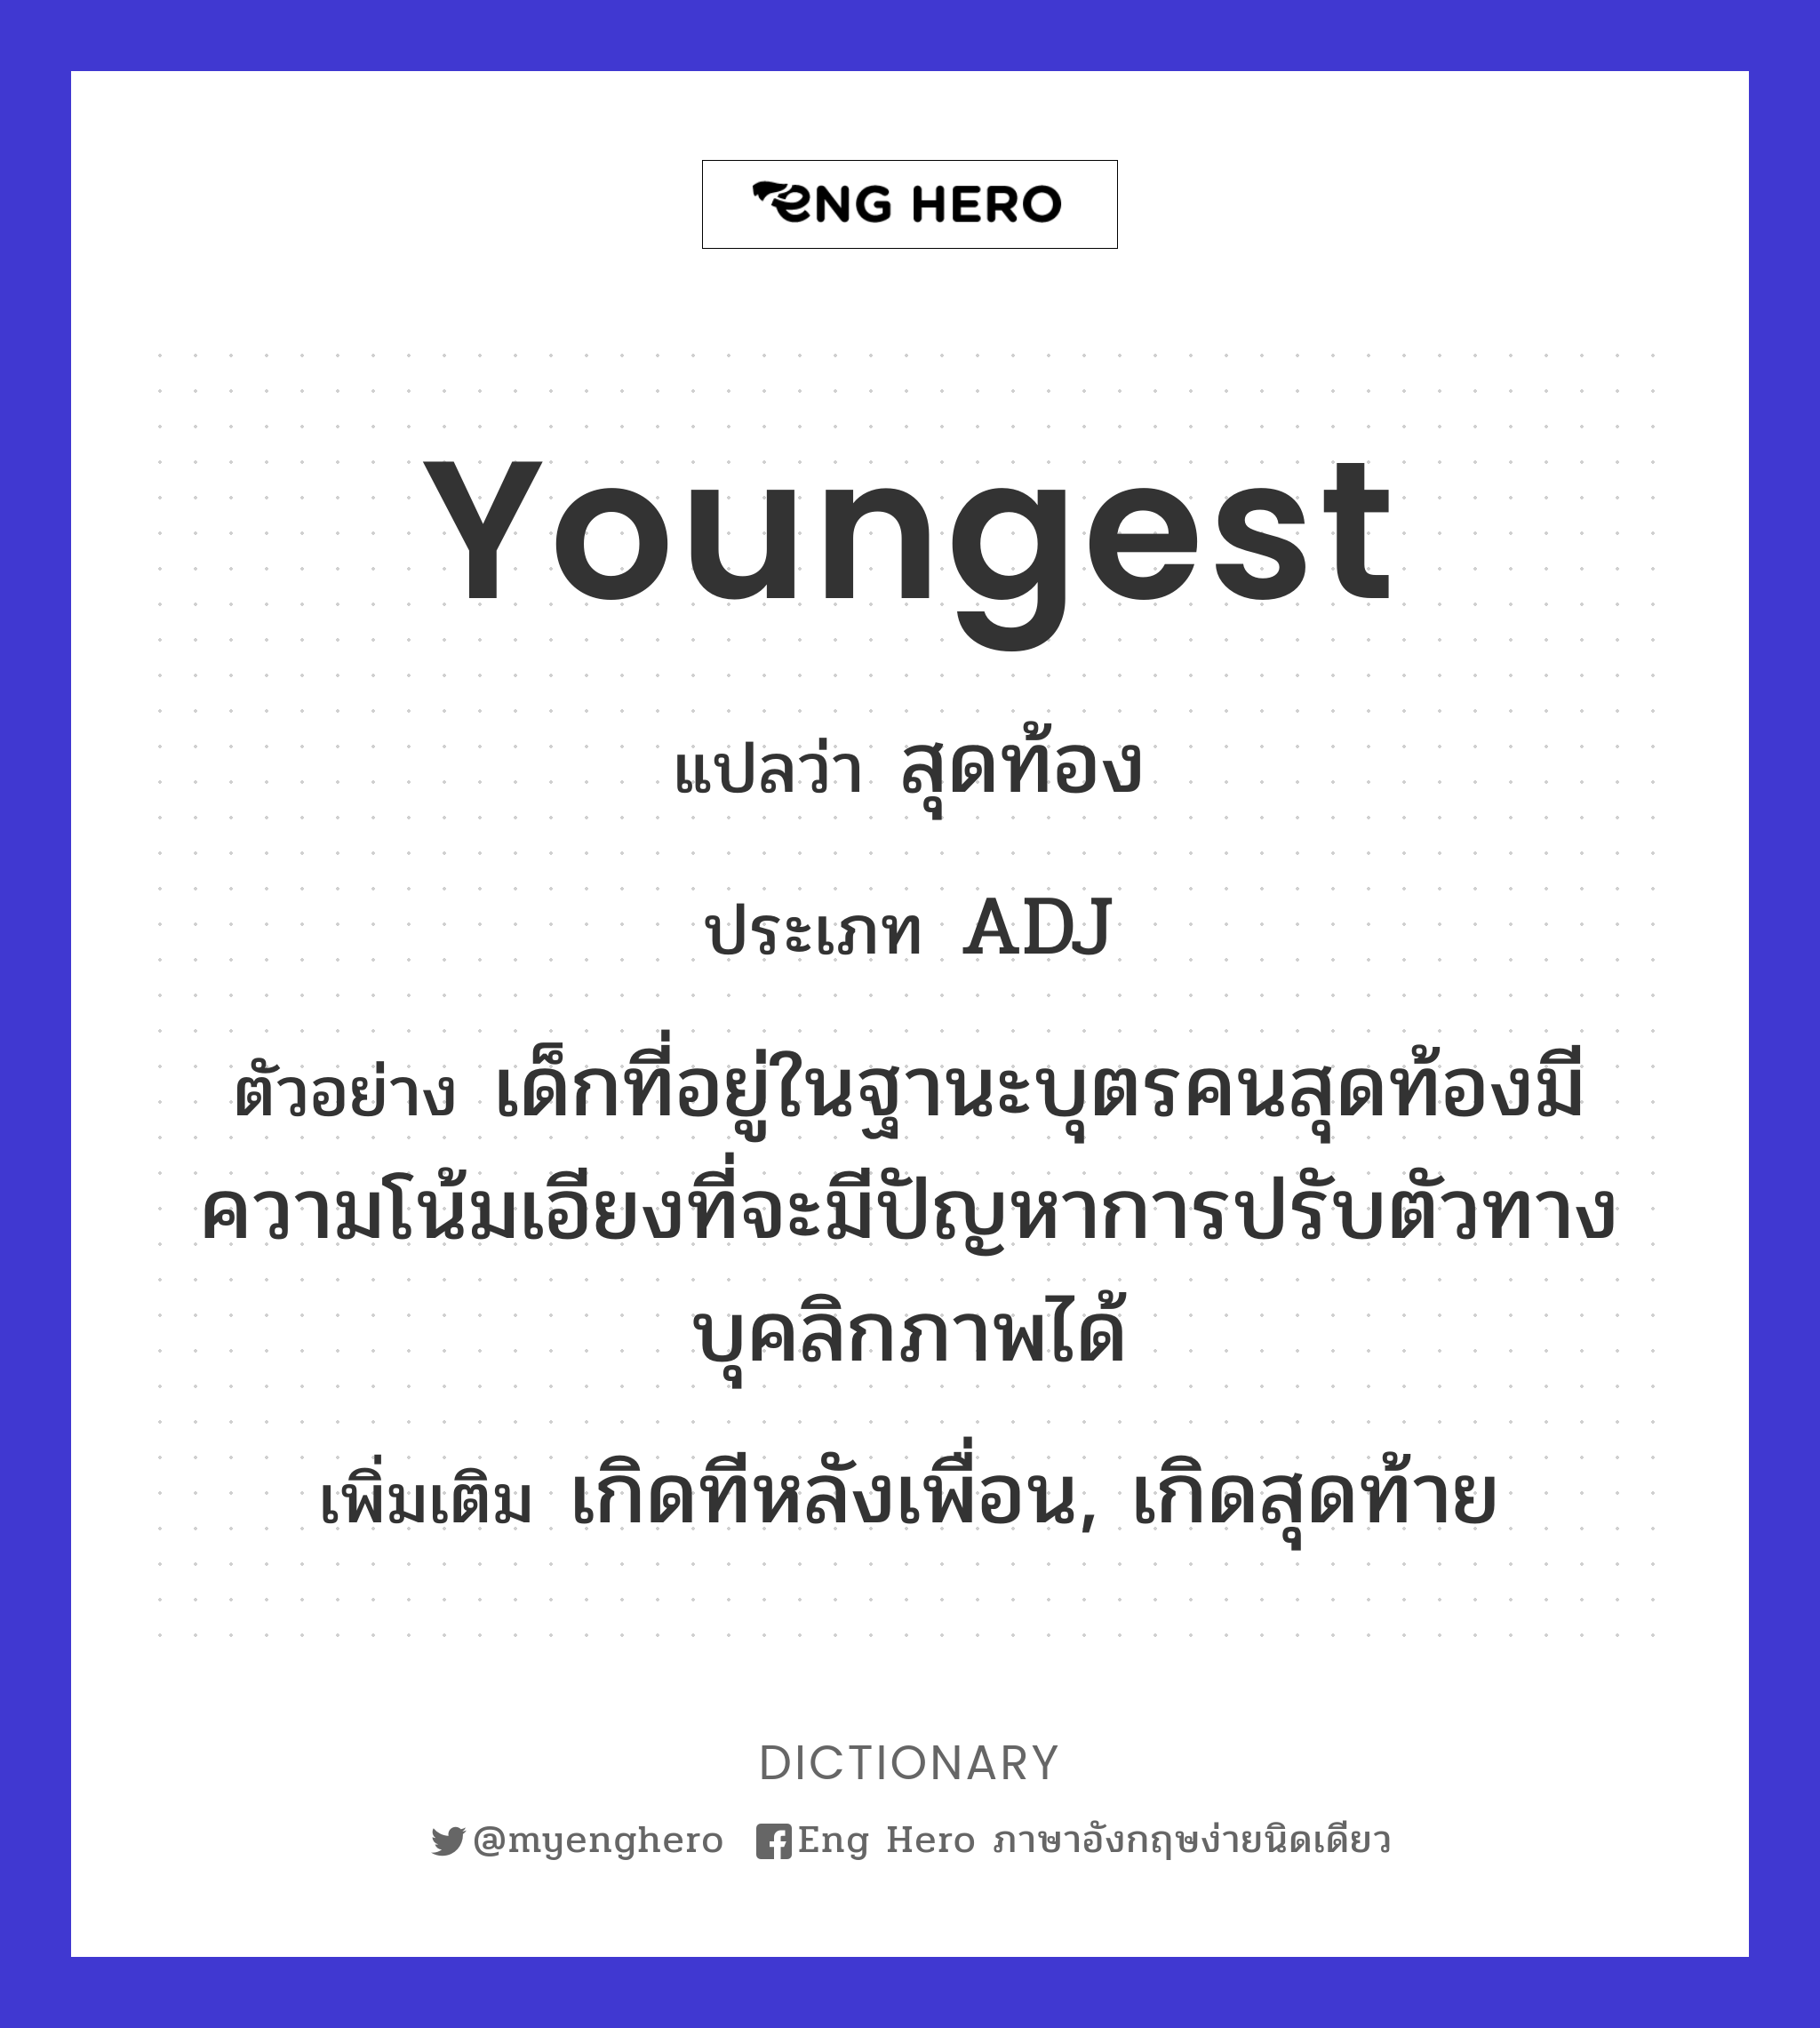 youngest